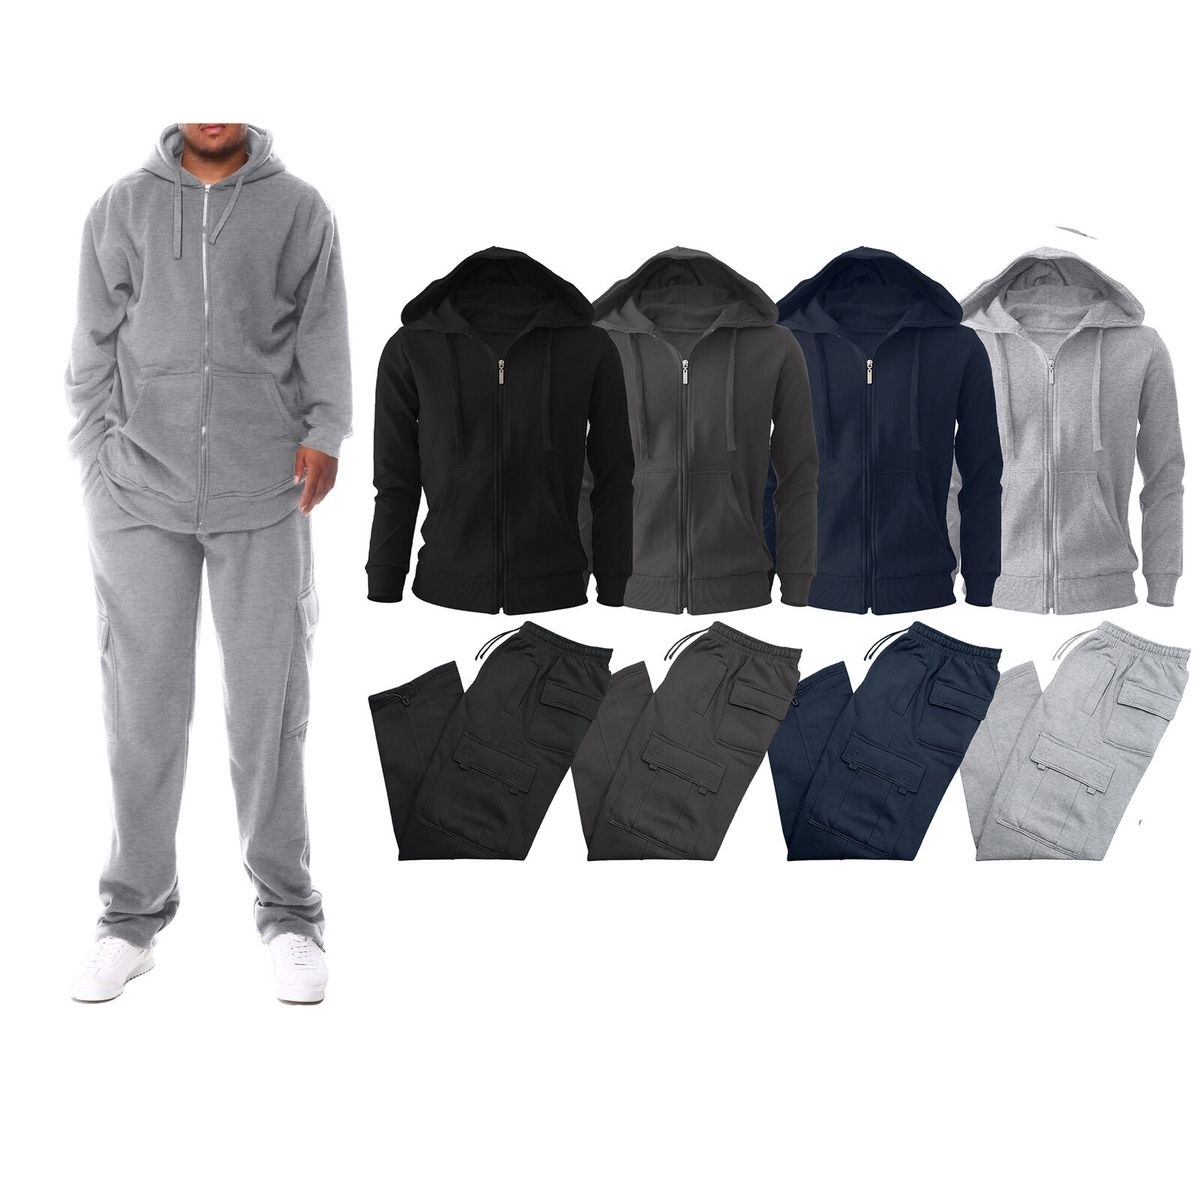 2-Pack: Men's Big & Tall Winter Warm Athletic Active Cozy Fleece Lined Multi-Pocket Full Zip Up Cargo Tracksuit - Grey, 3xl